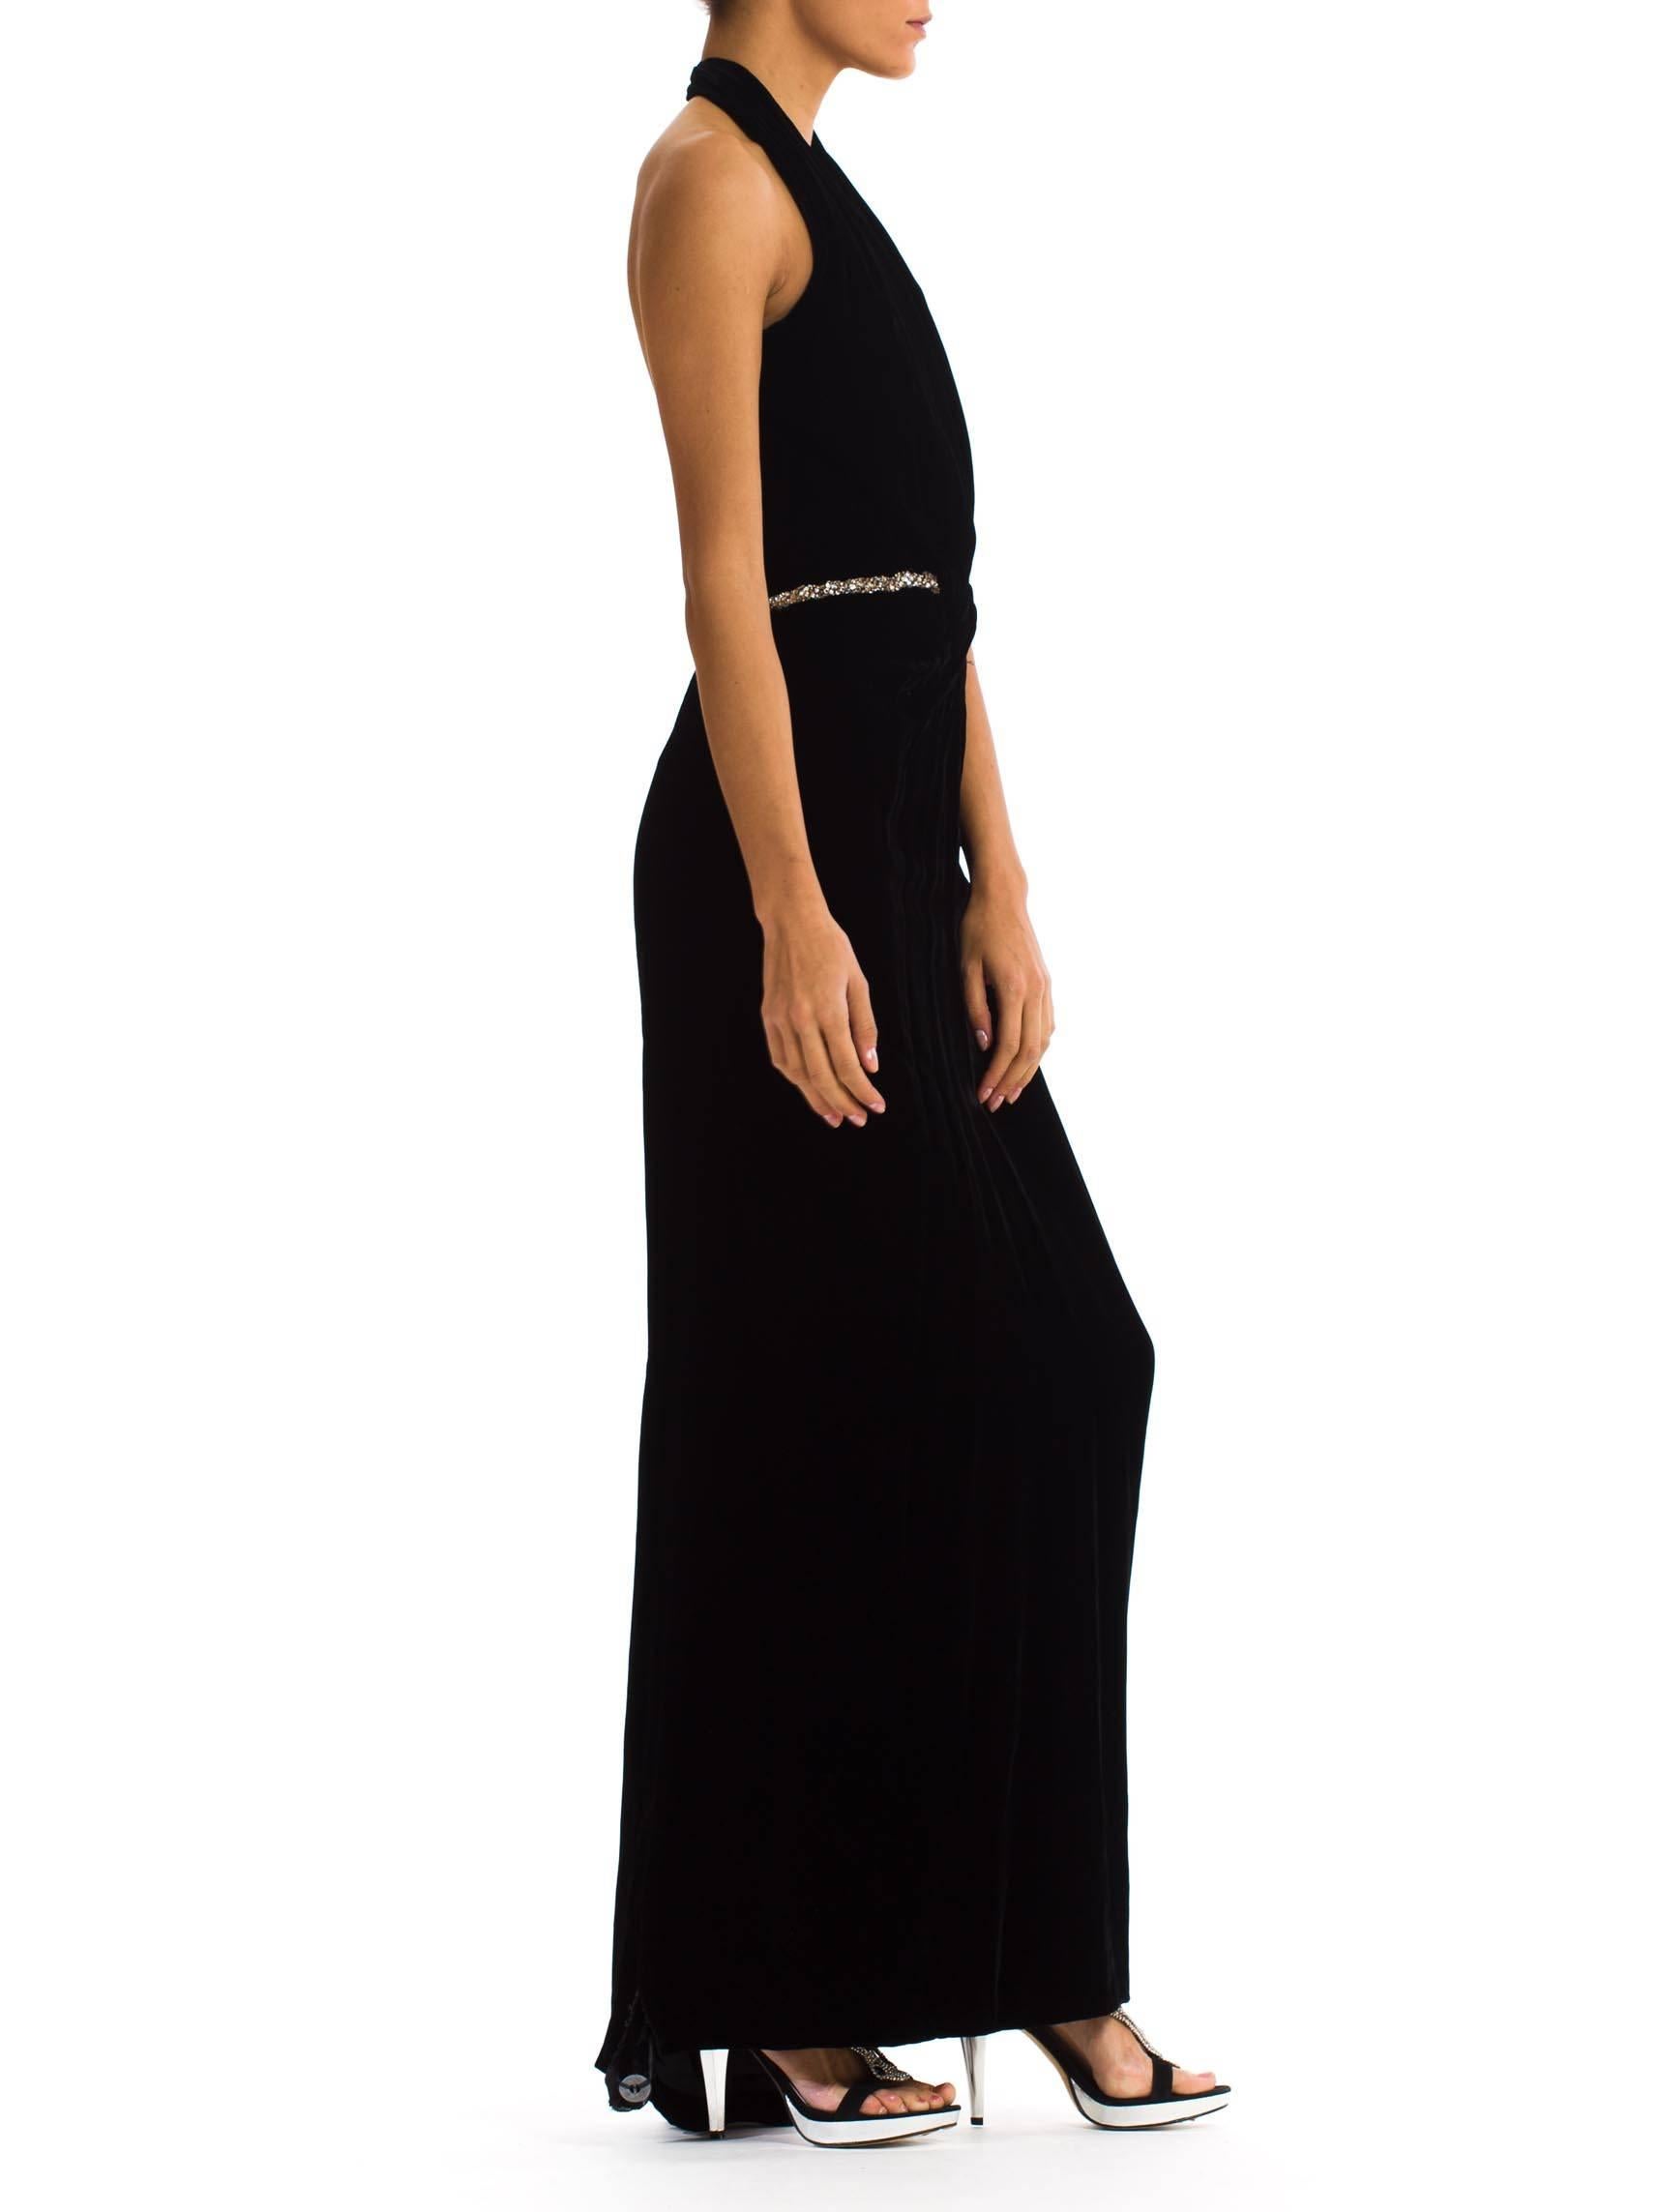 1970S CEIL CHAPMAN Black Rayon & Silk Velvet Plunging Halter Neck Gown With Sli In Excellent Condition For Sale In New York, NY